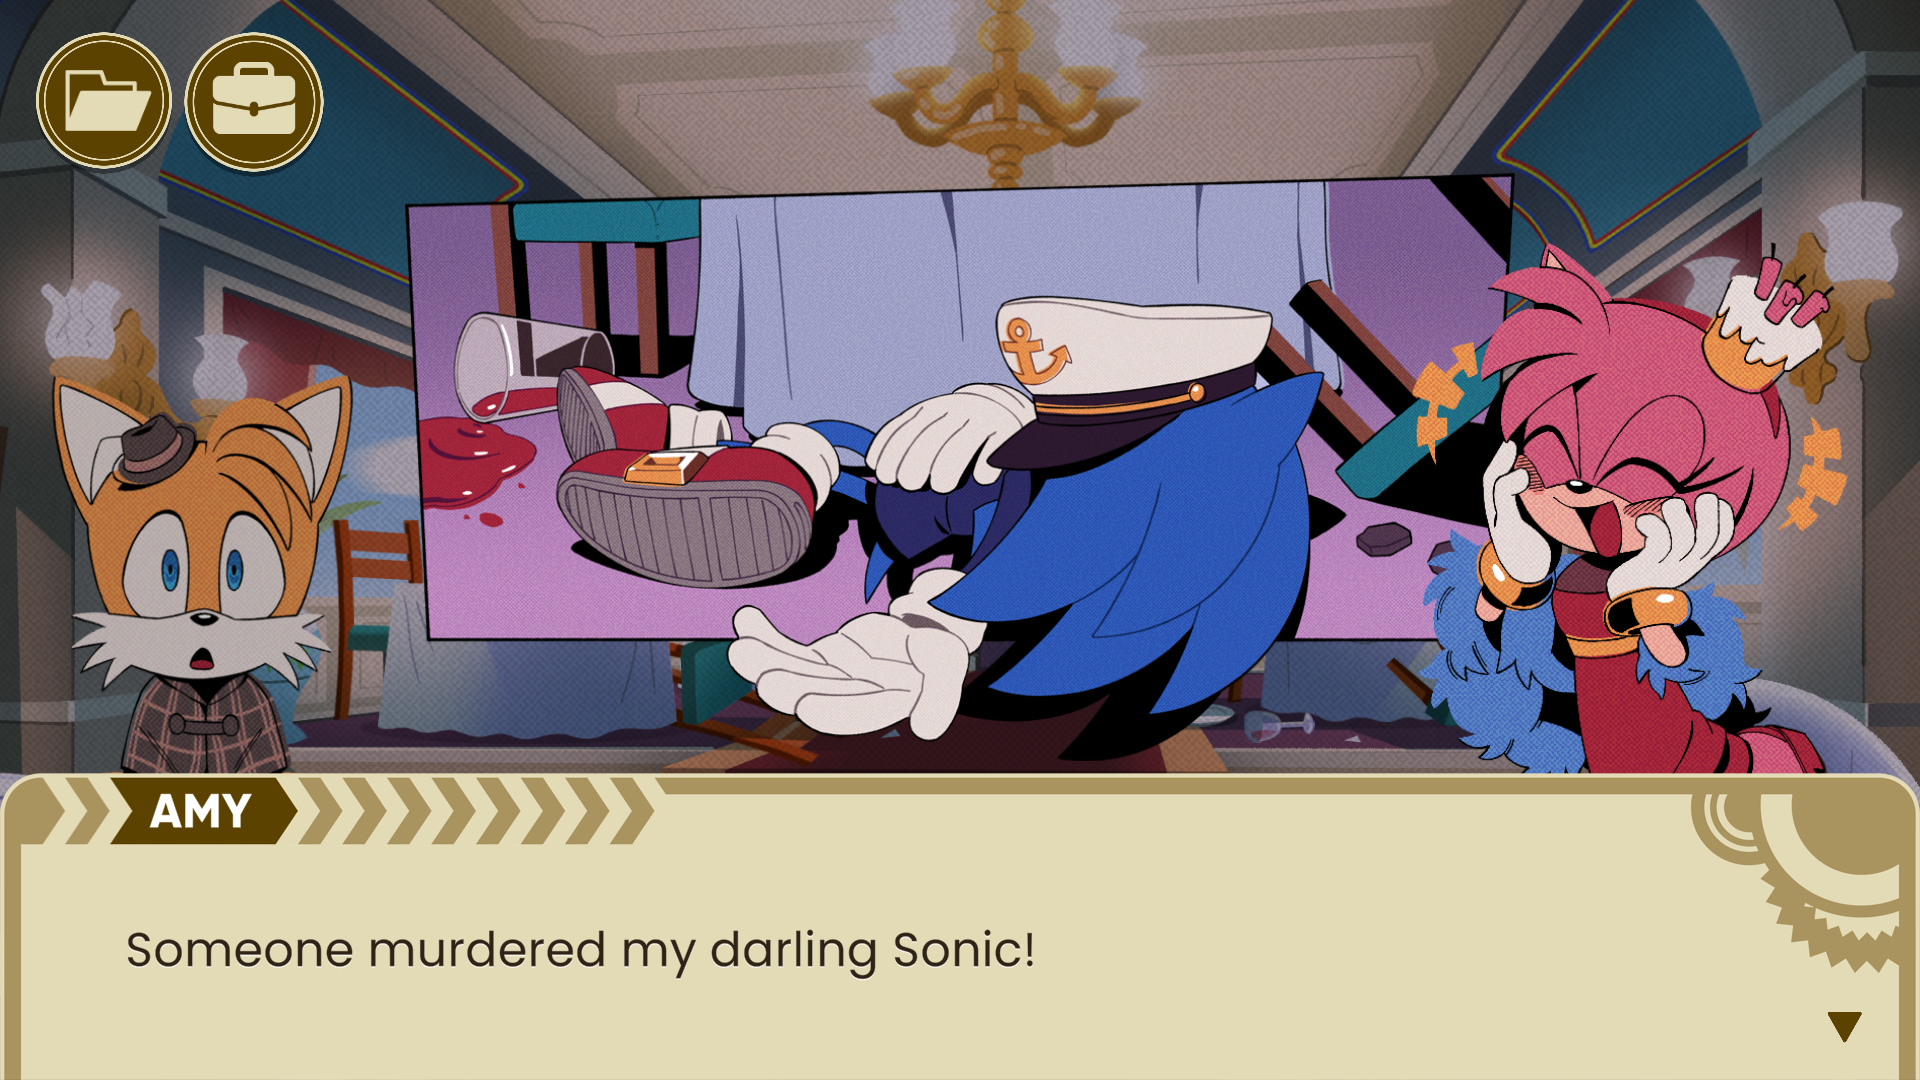 A screenshot of the game where Sonic lies dead on the floor and another character says "Someone murdered my darling Sonic!"